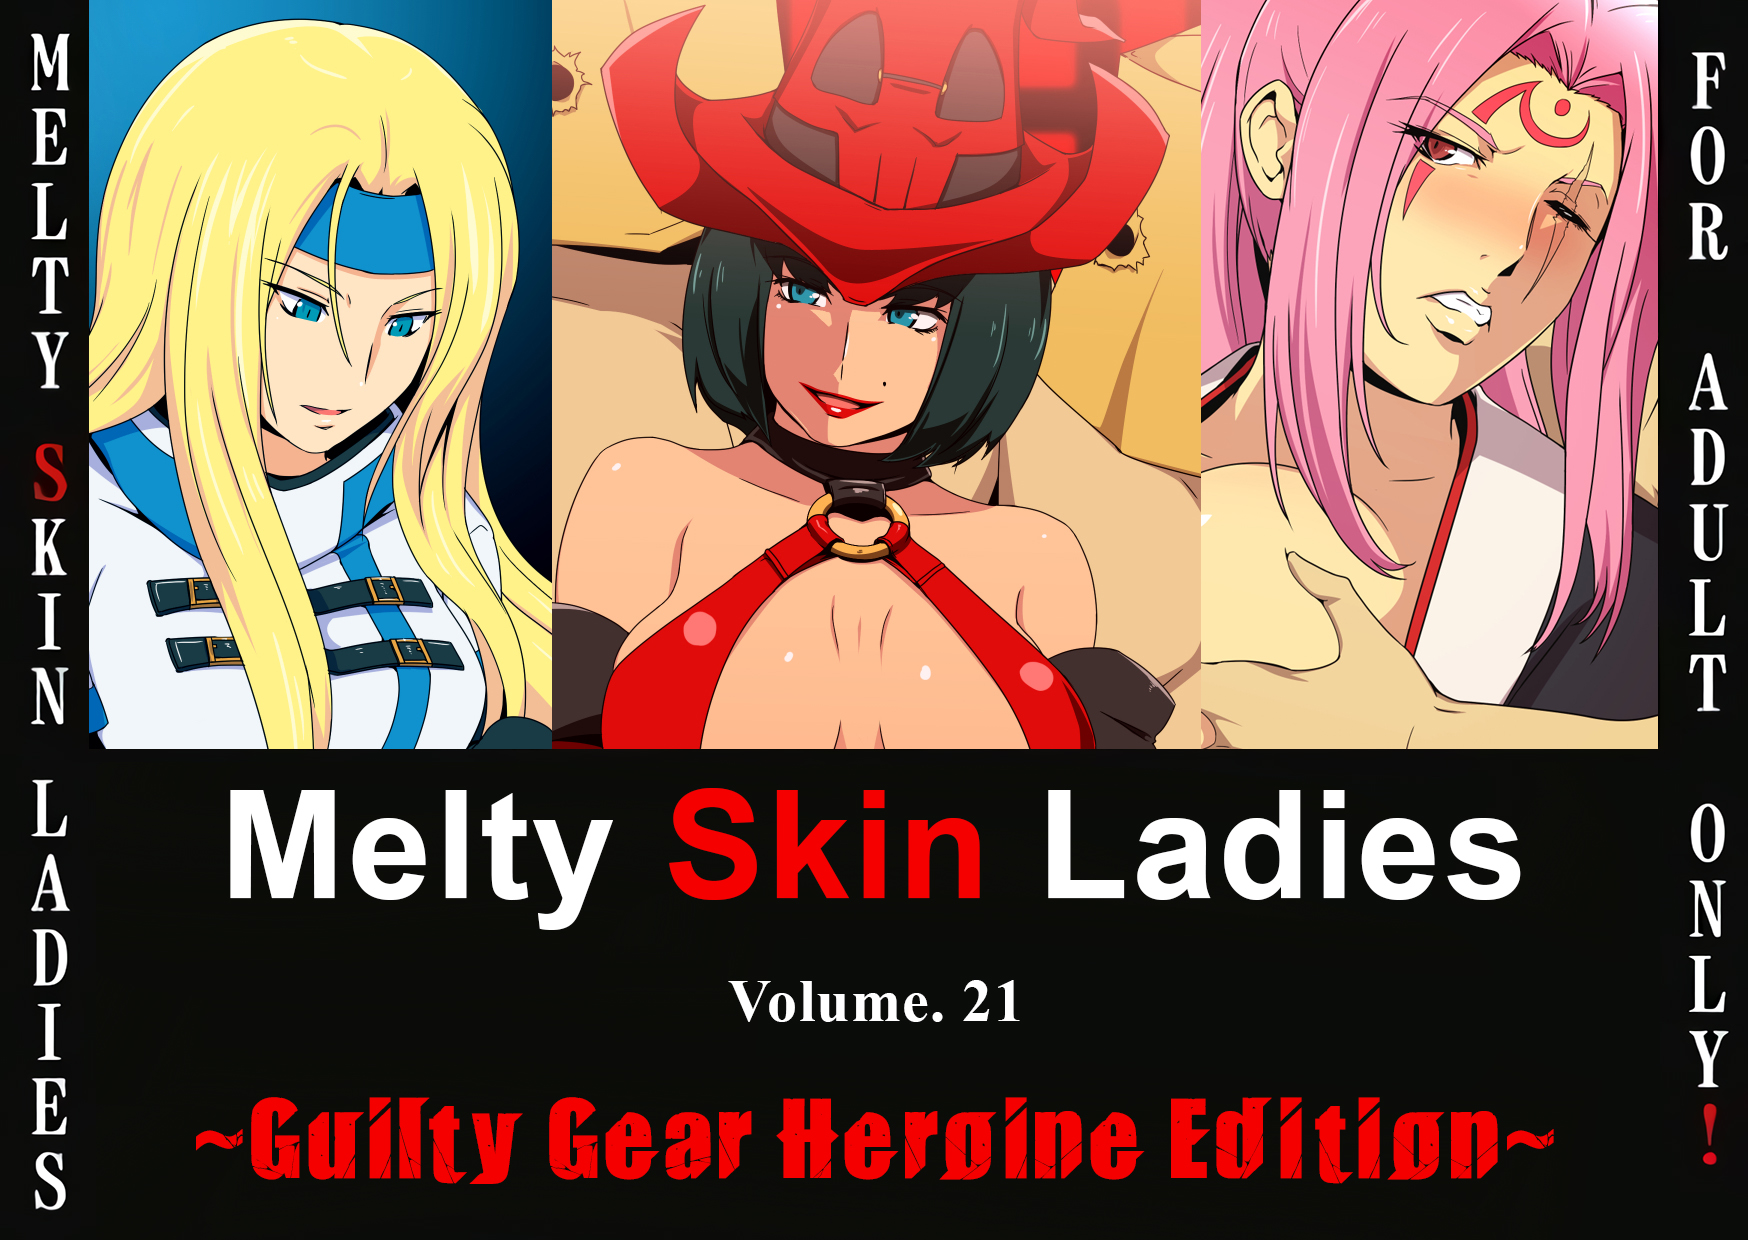 [Spiral Brain (Greco Roman)] Melty Skin Ladies Vol. 21 ~Guilty Gear Heroine Edition~ (Guilty Gear) [English] [EHCOVE] - Page 1